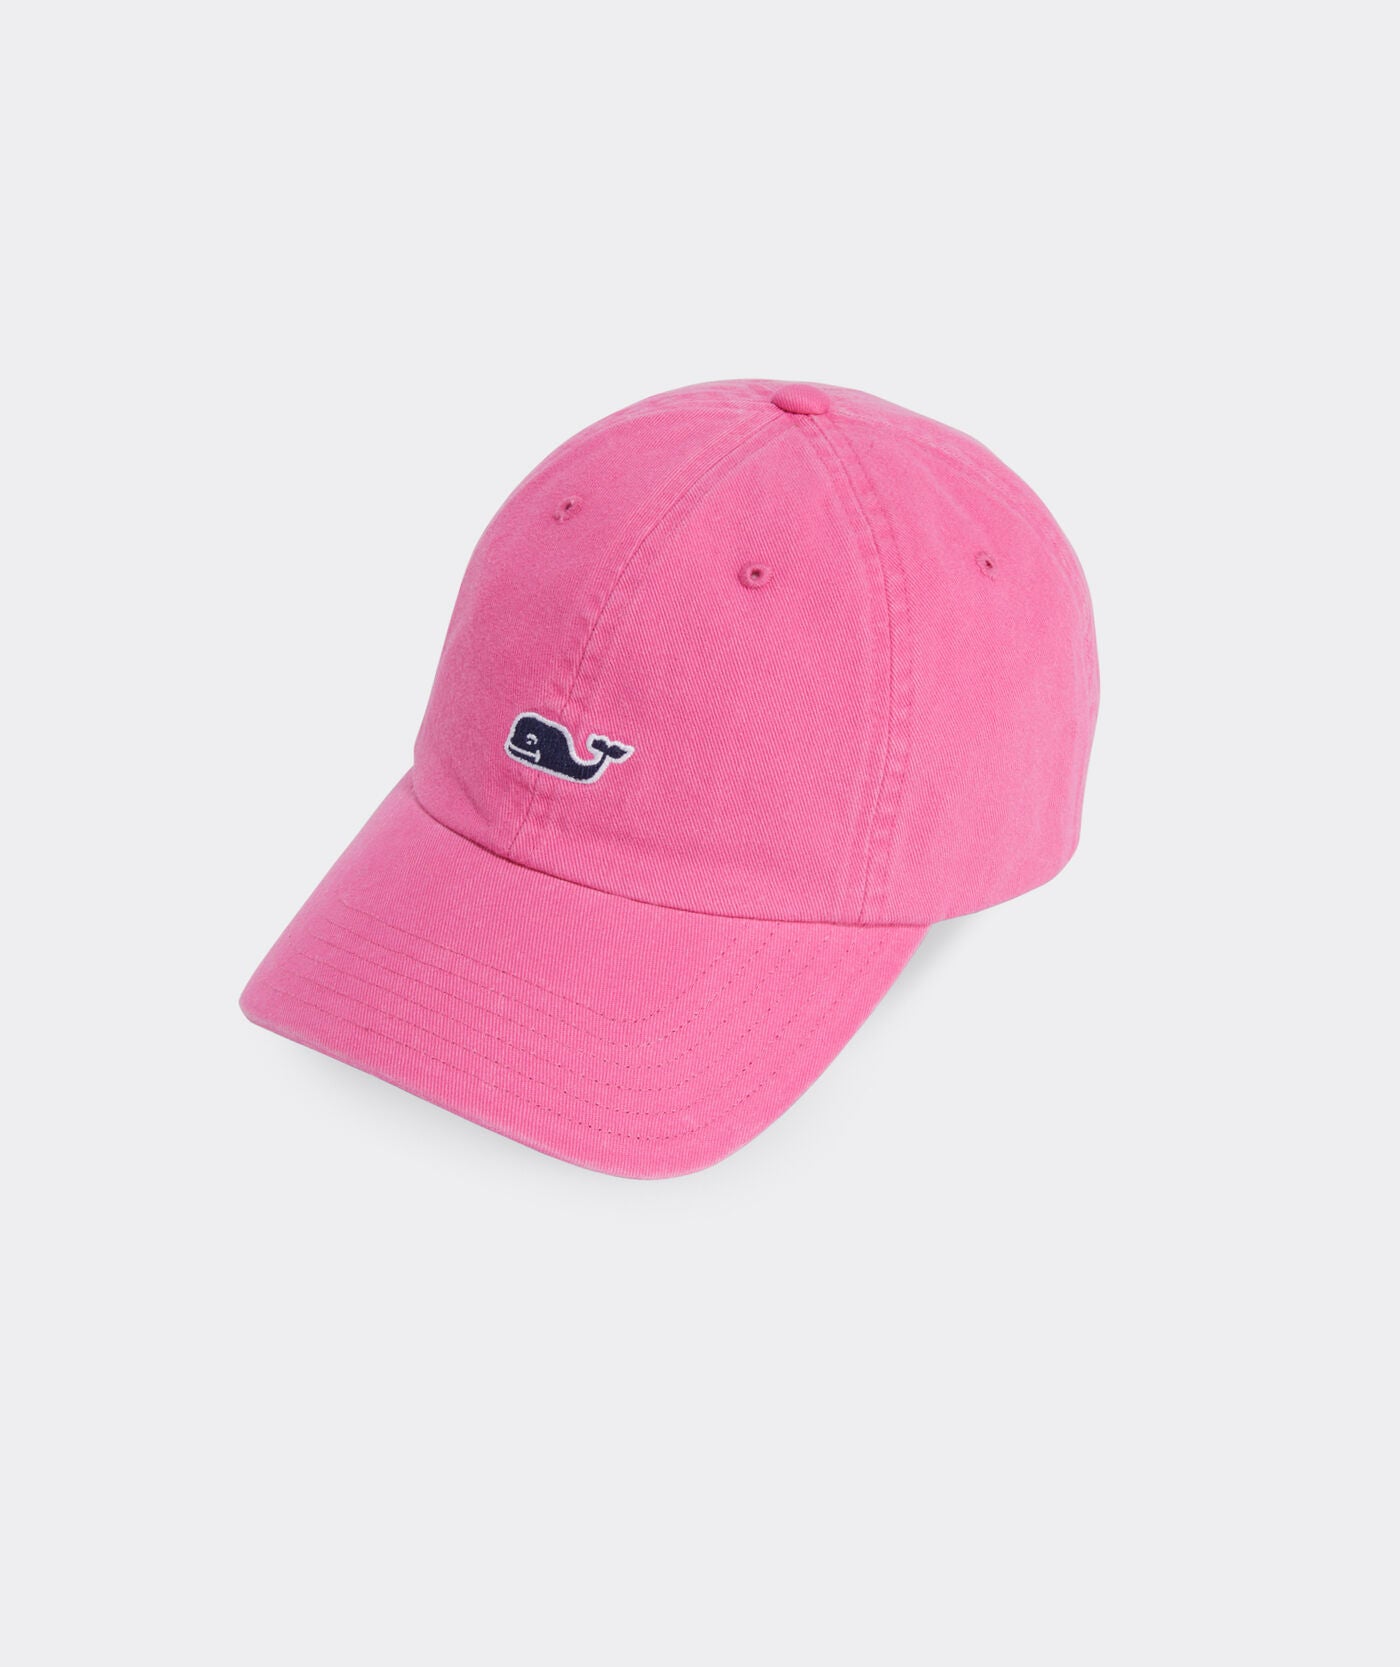 Vineyard Vines Baseball Hat  BrandFuse - Promotional products in